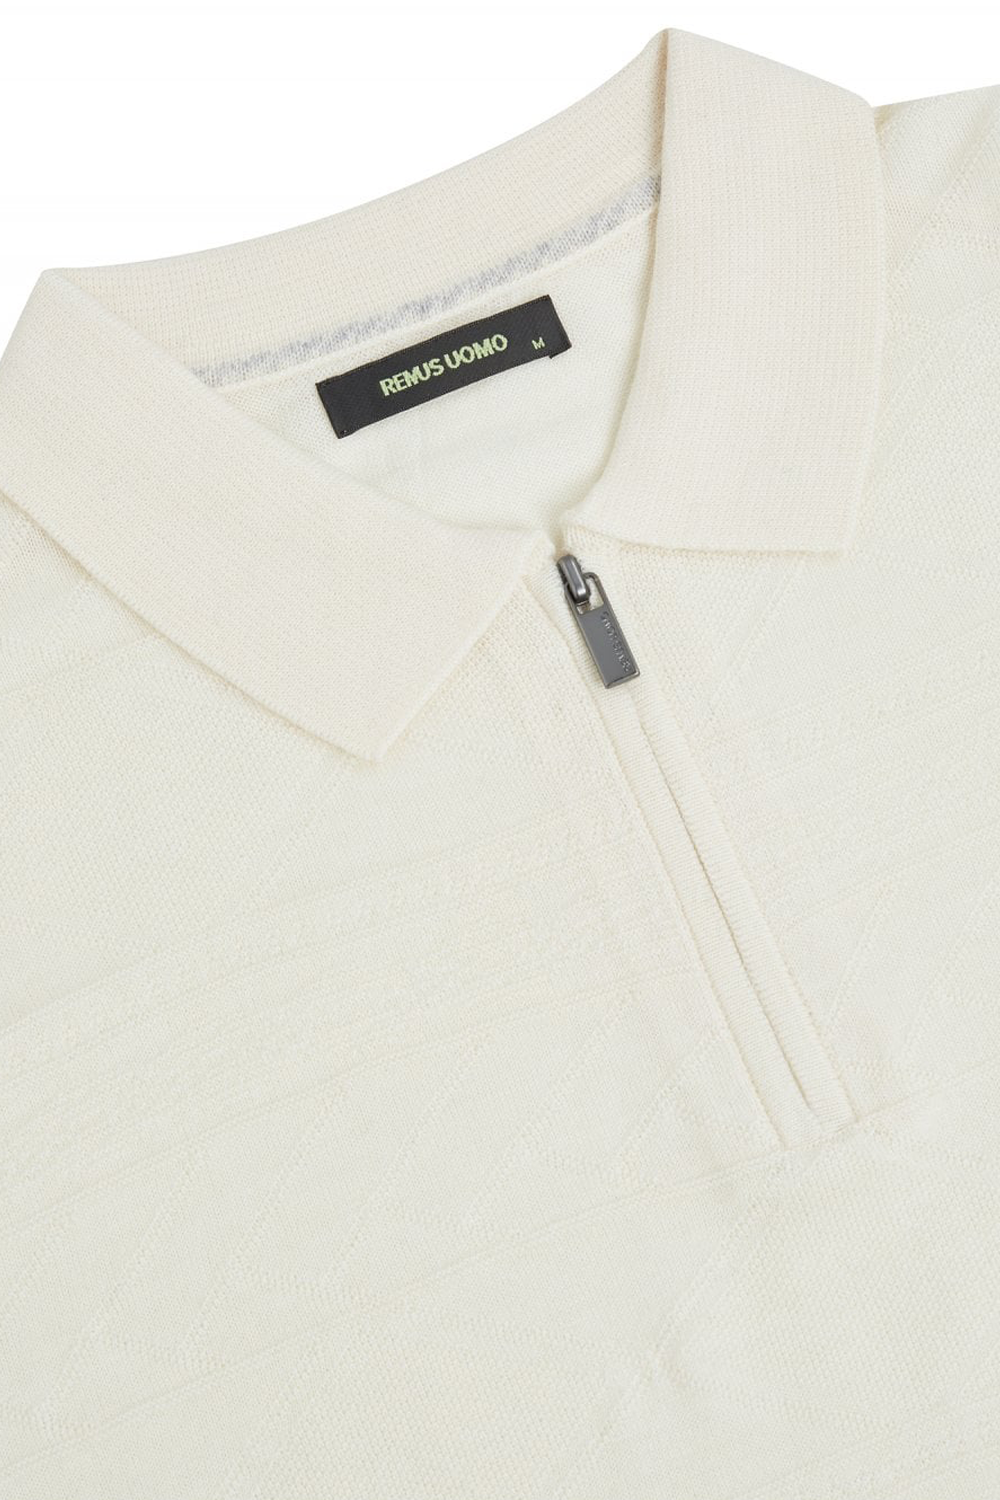 Buy the Remus Uomo Zip Knitted Polo White at Intro. Spend £50 for free UK delivery. Official stockists. We ship worldwide.